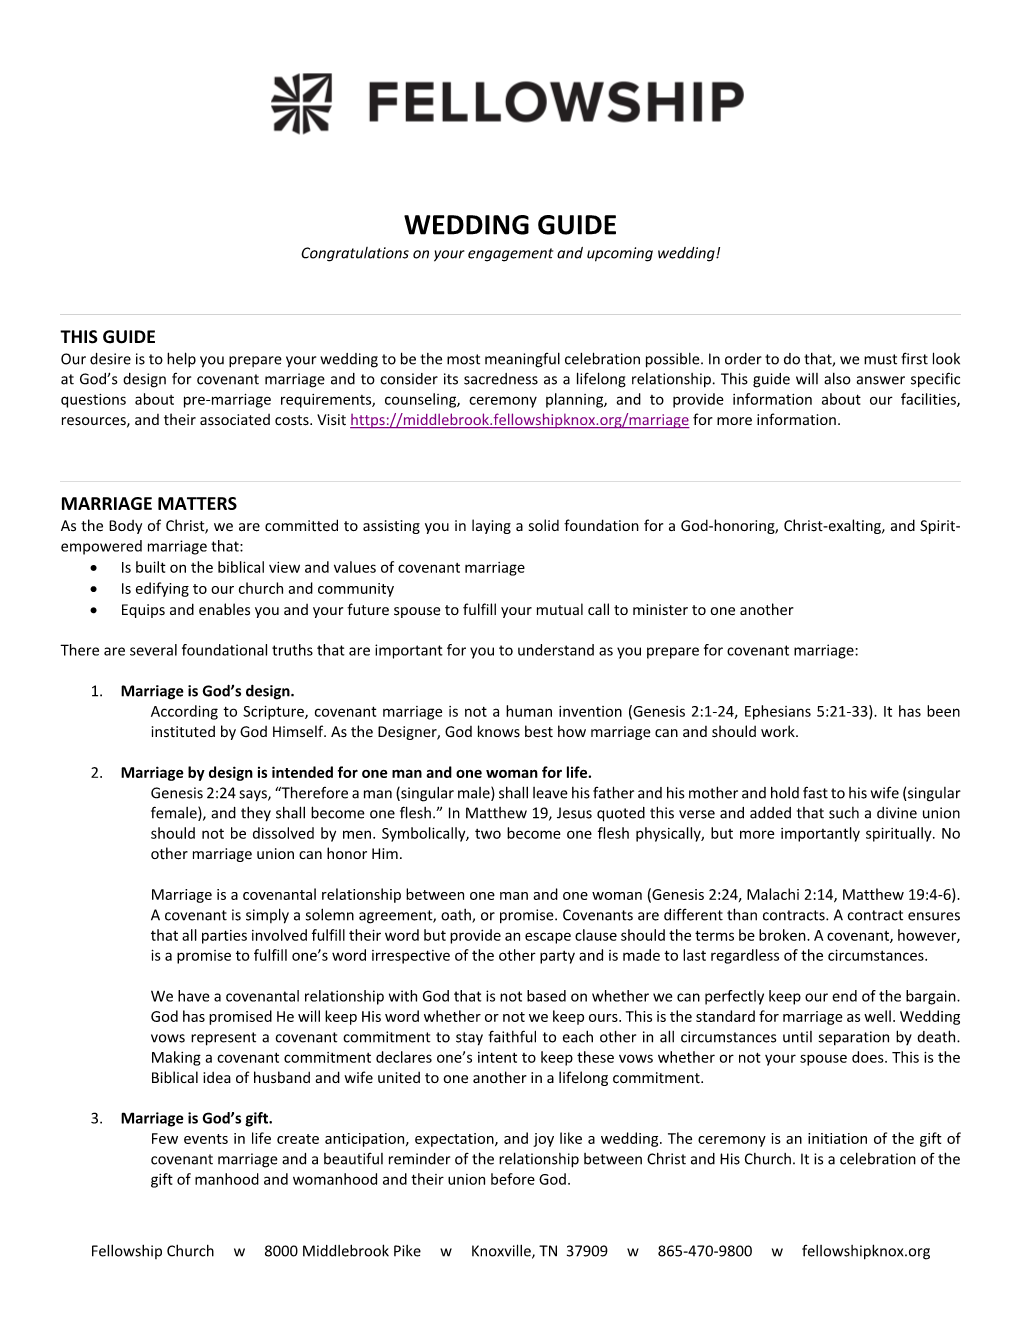 WEDDING GUIDE Congratulations on Your Engagement and Upcoming Wedding!